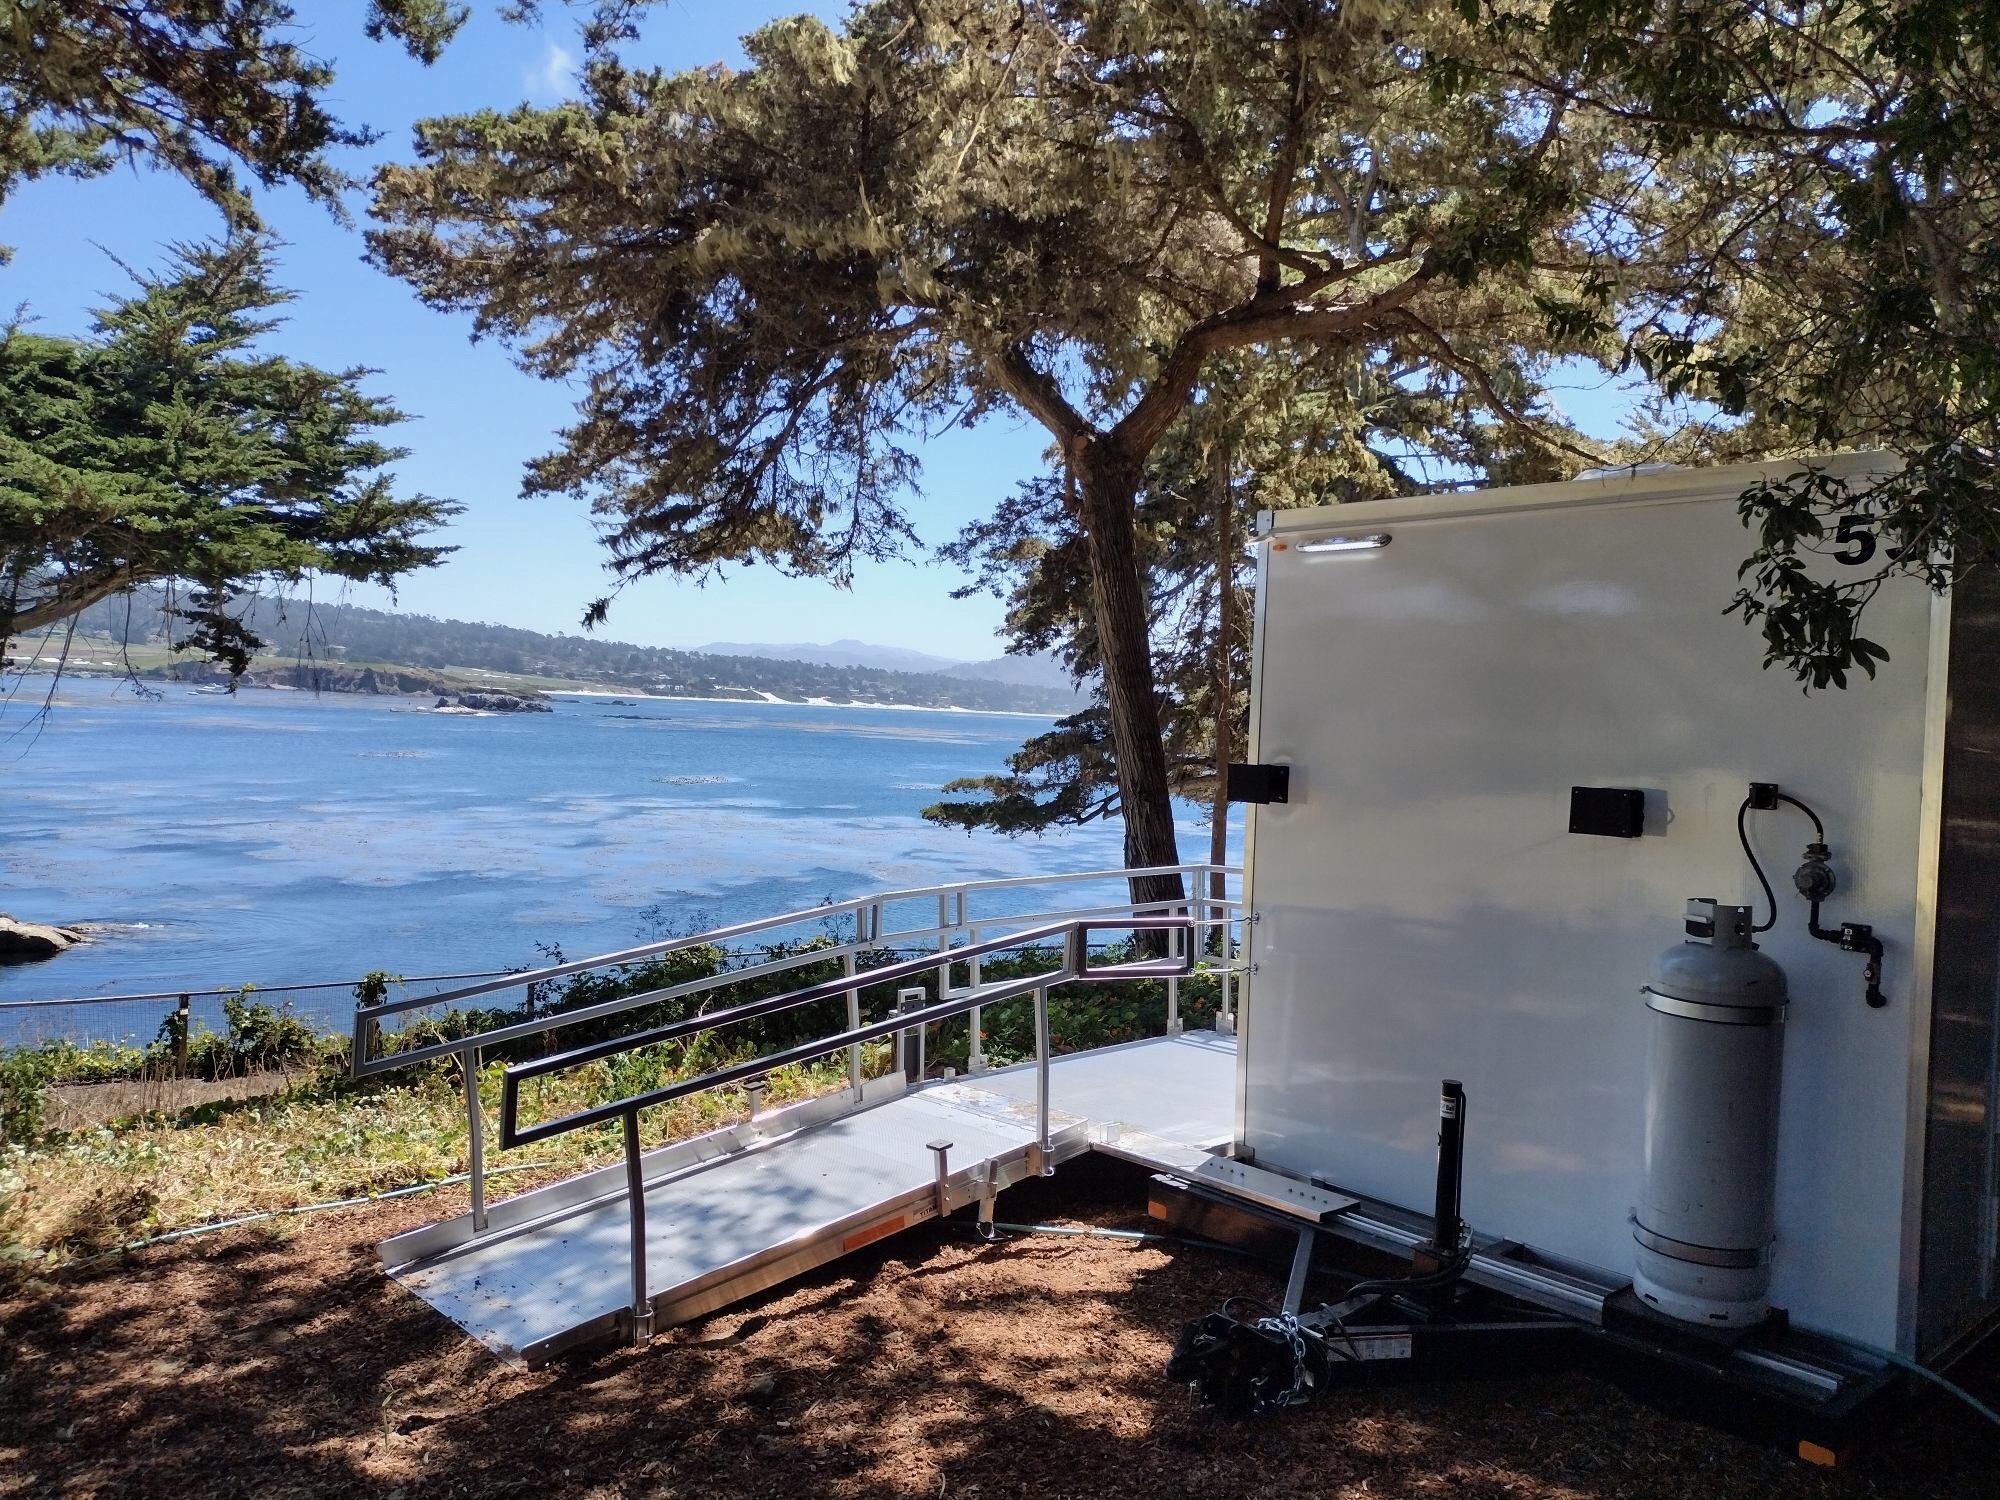 ADA Luxury Portable Shower trailers by the Sea - The Lavatory Utah